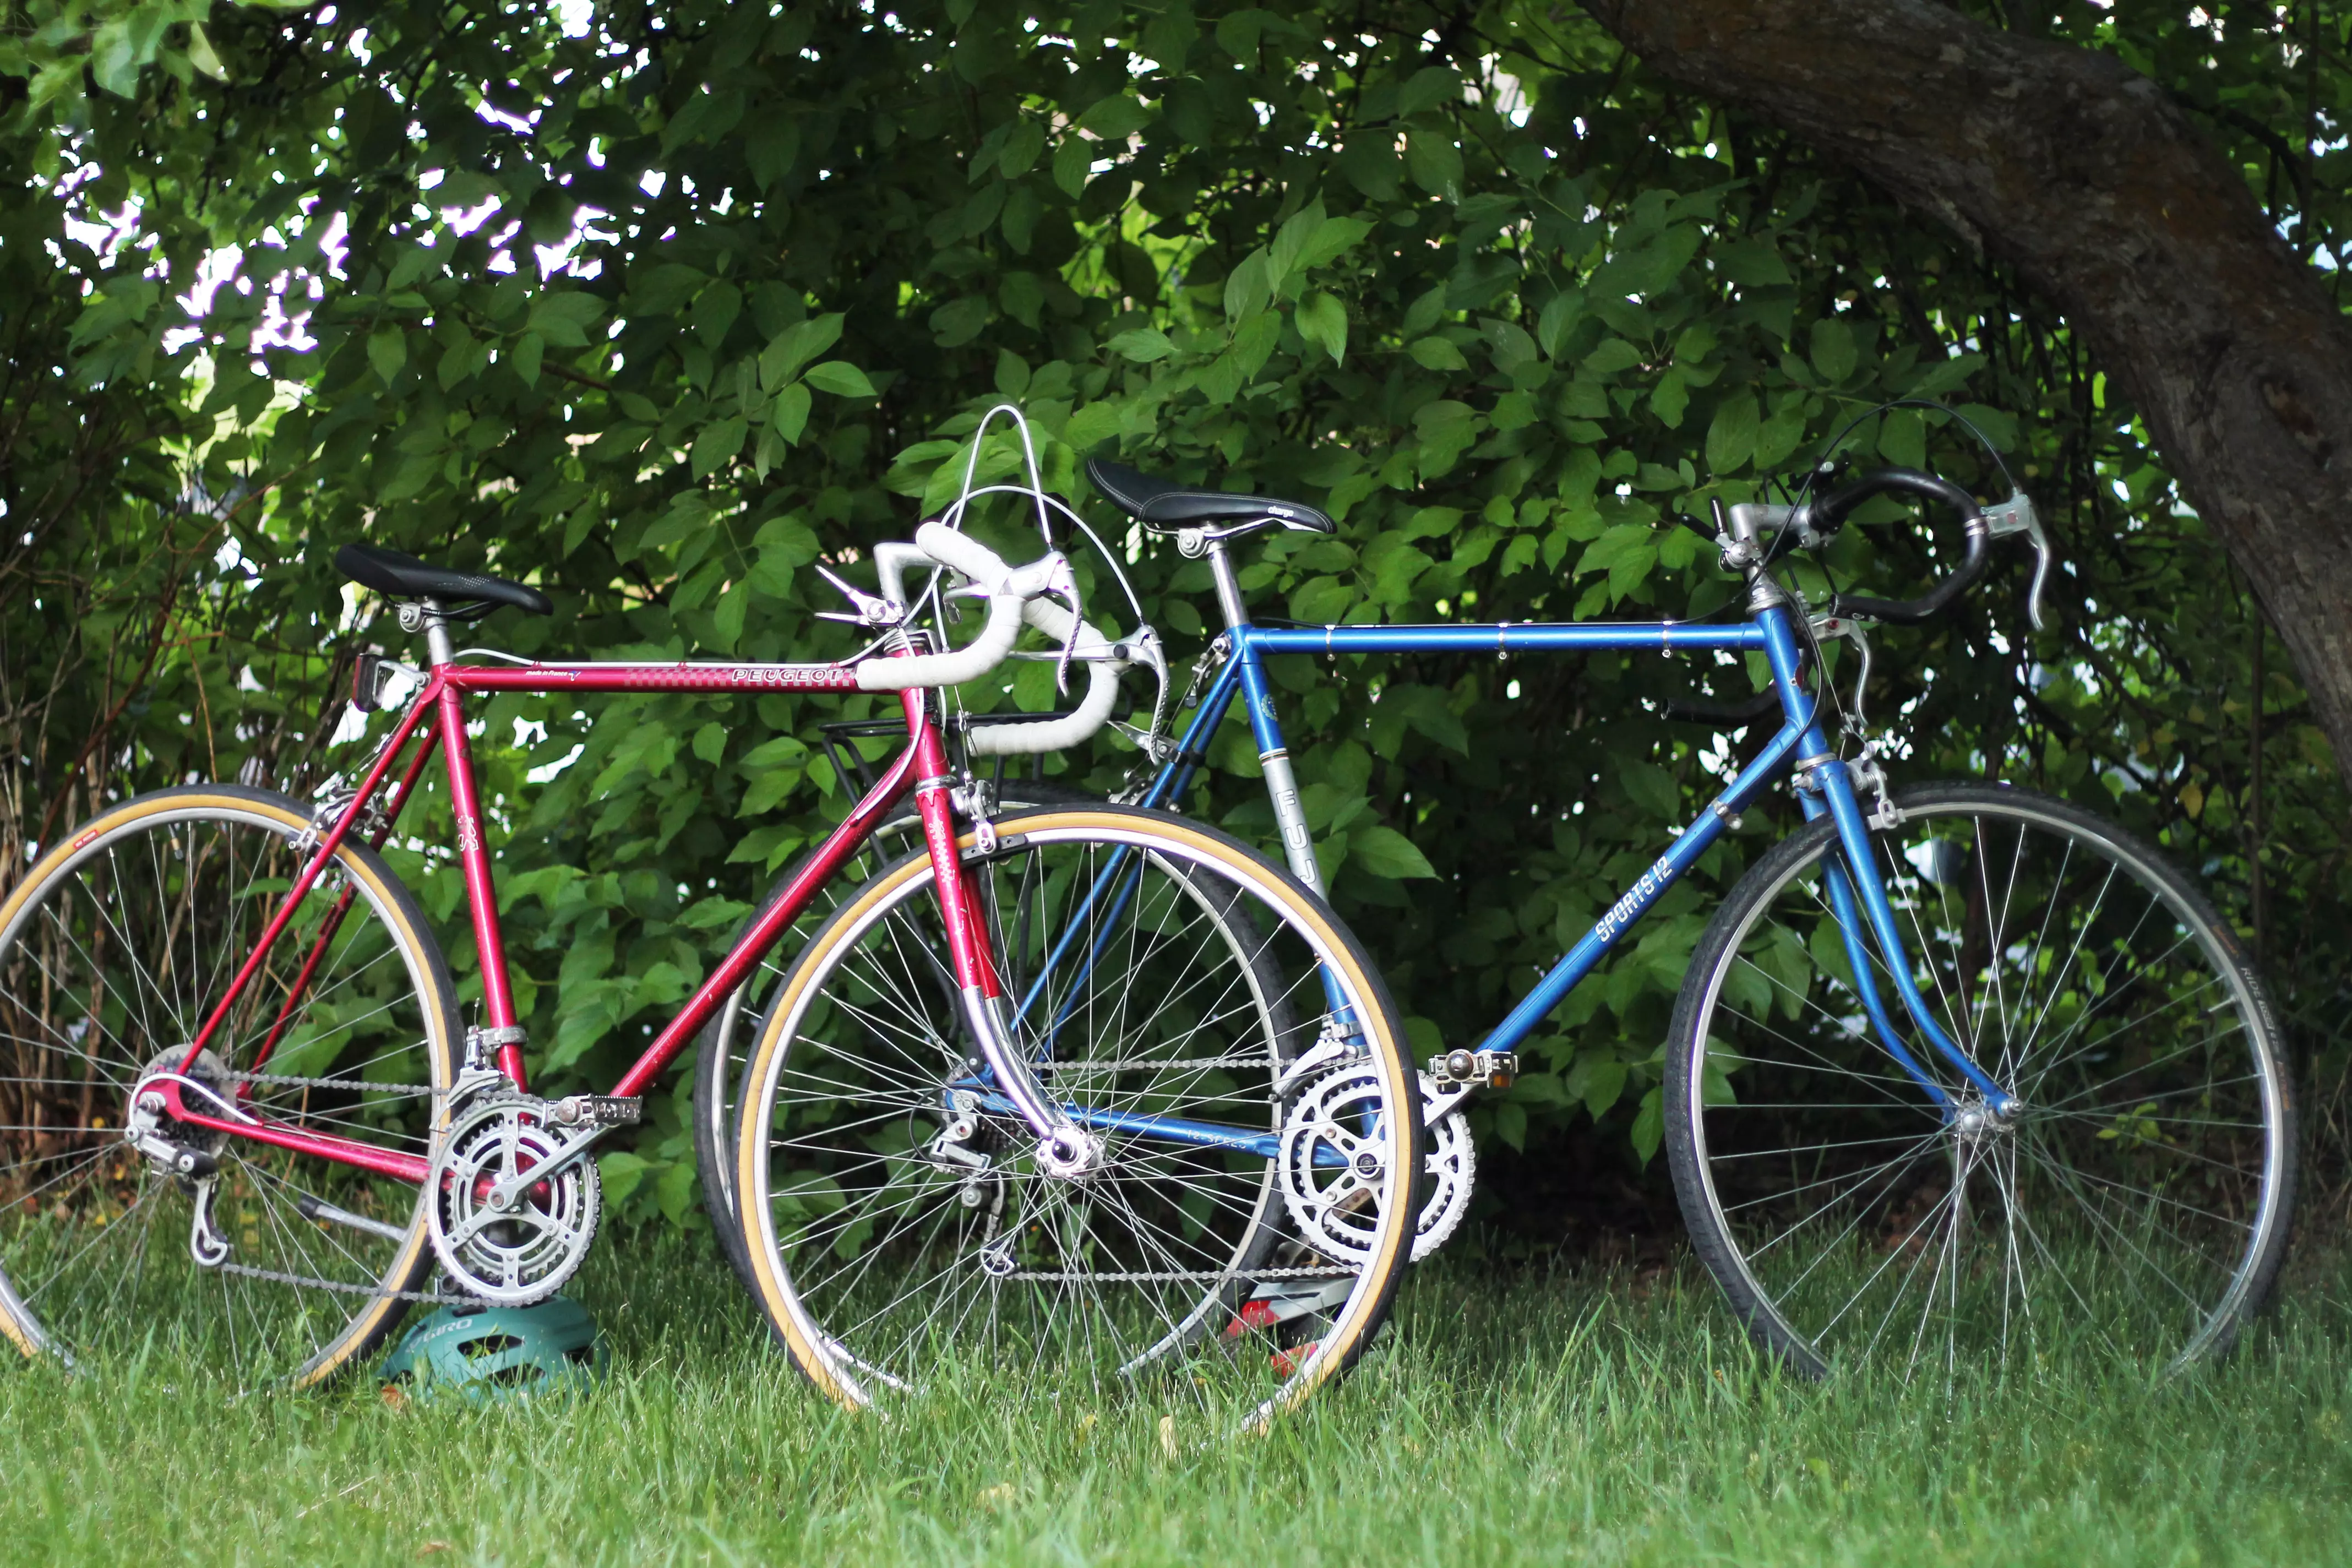 Two classic road bikes on grass